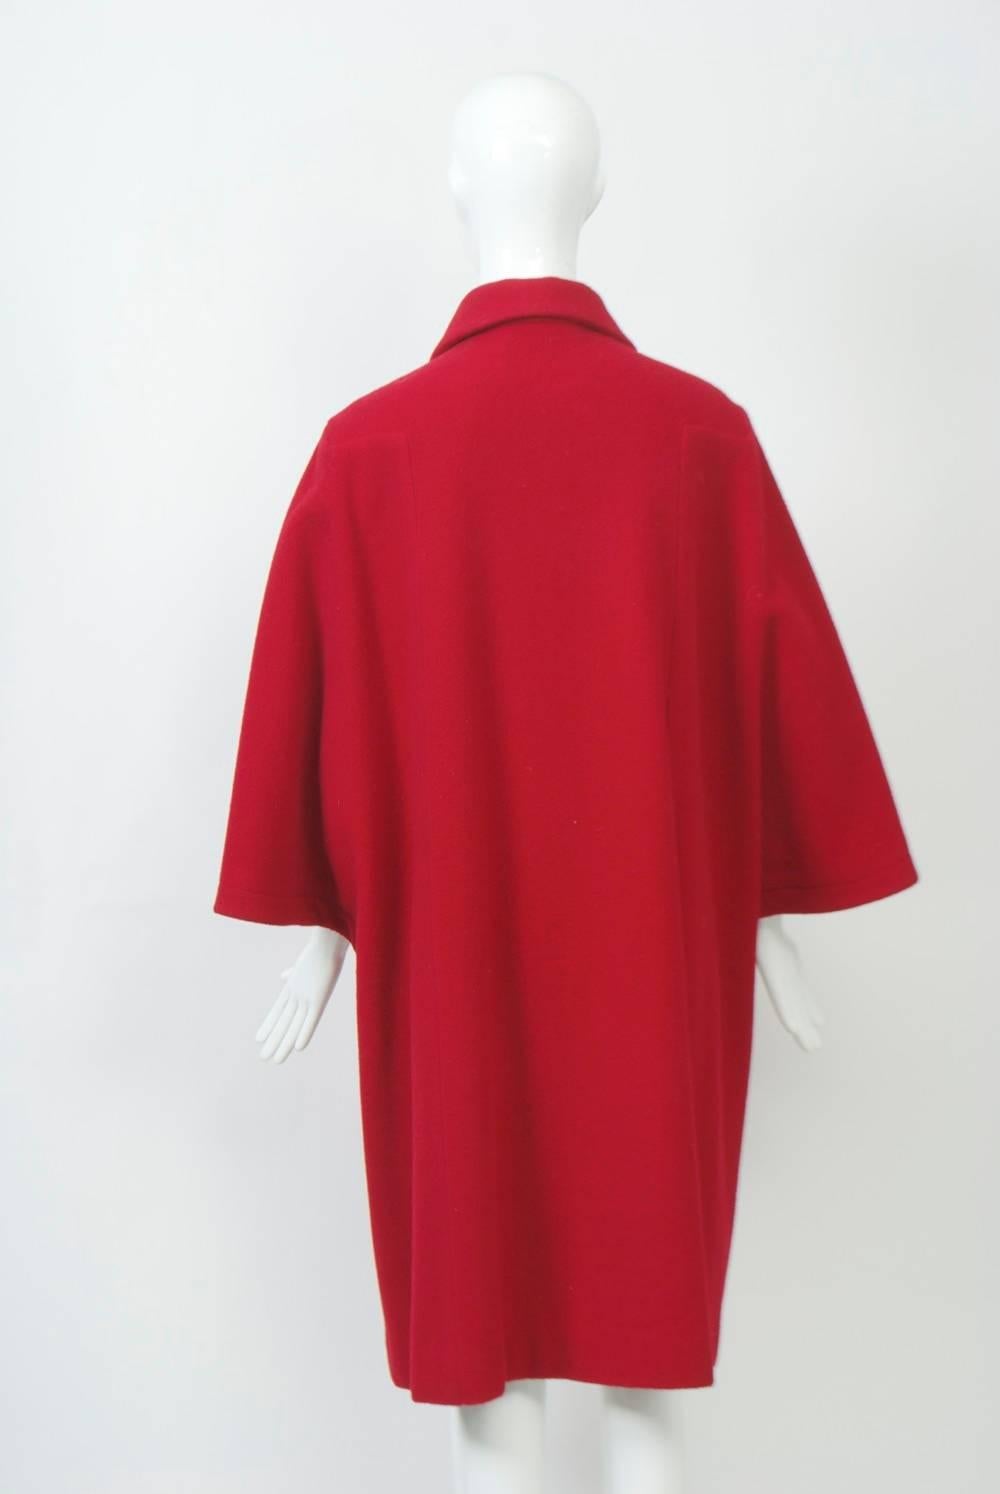 Striking red wool coat by Adolfo featuring cape sleeves, a small collar, and four black dome buttons down the front. Underneath the cape sleeves, the arms are free. Side pockets. Unlined. Interesting construction and detailing. Long black gloves